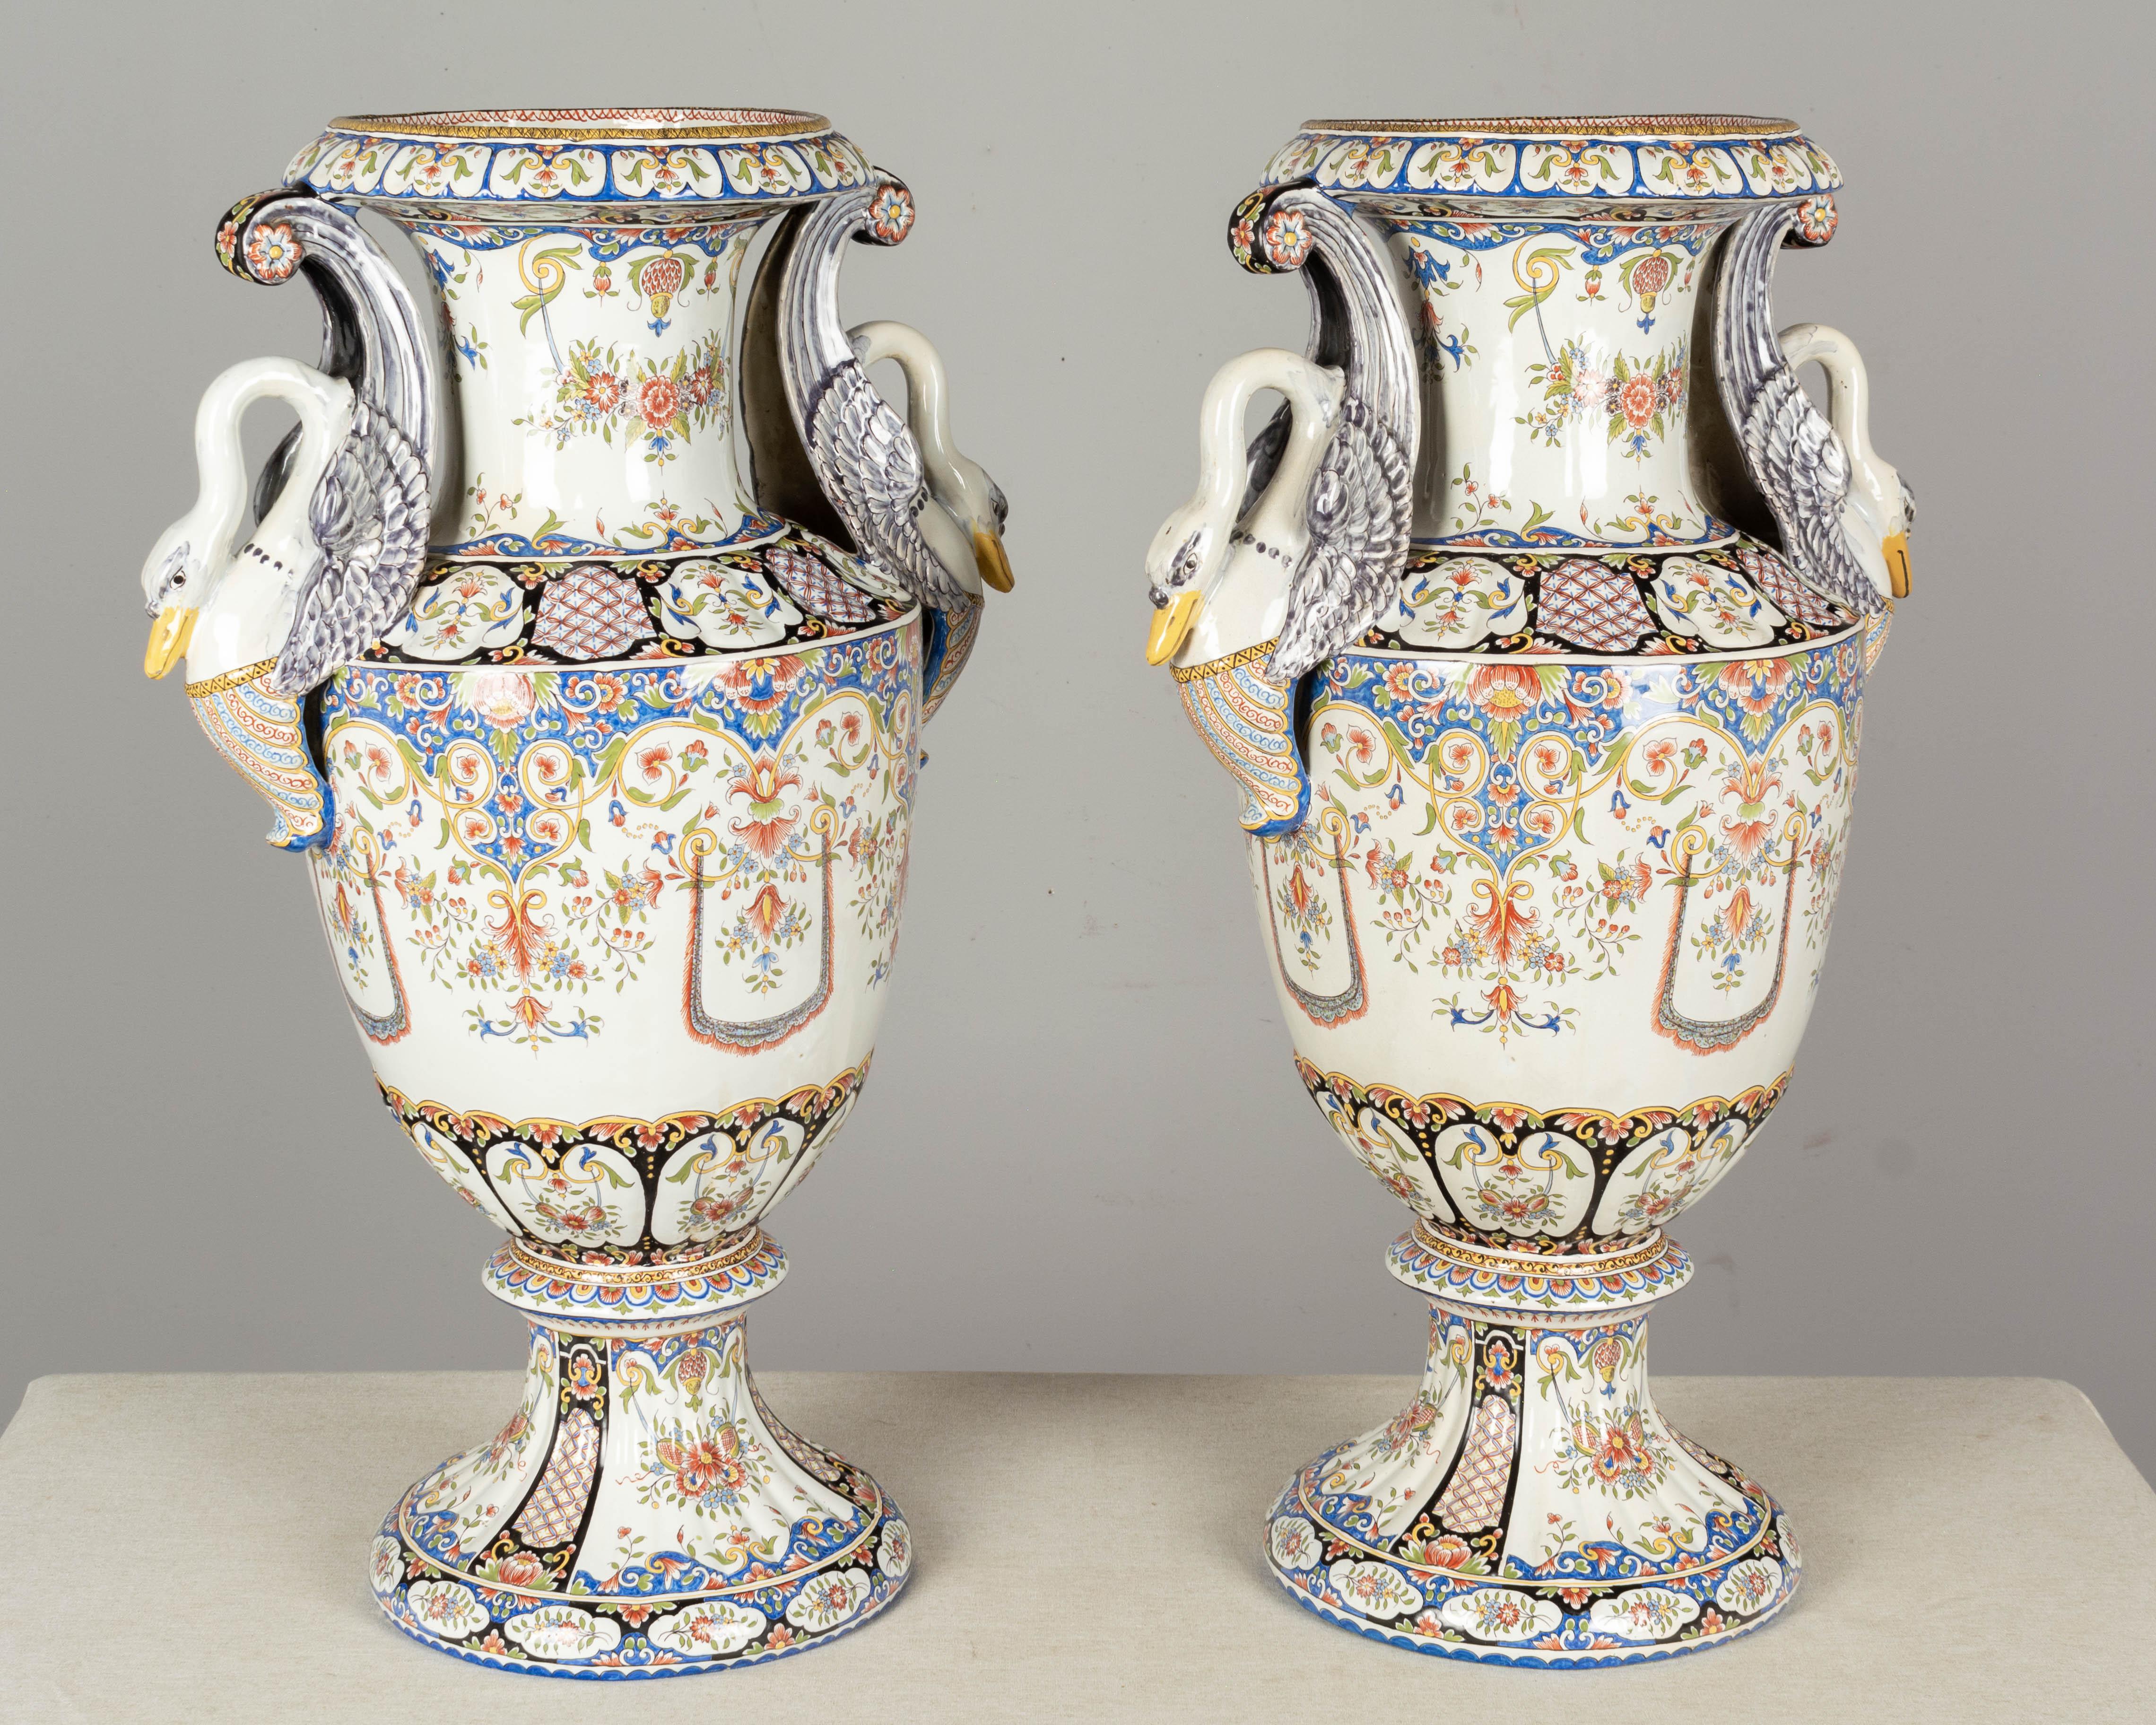 Beaux Arts 19th Century French Desvres Faience Urns, a Pair For Sale